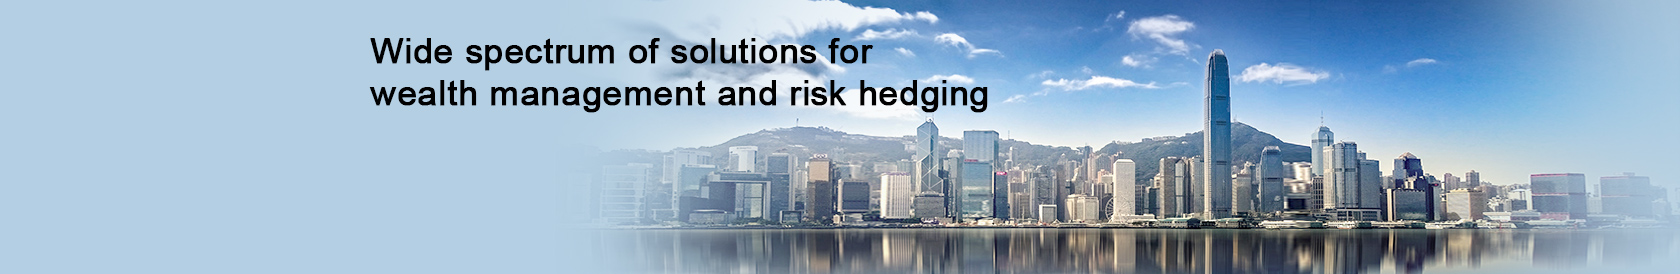 Wide spectrum of solutions for wealth management and risk hedging